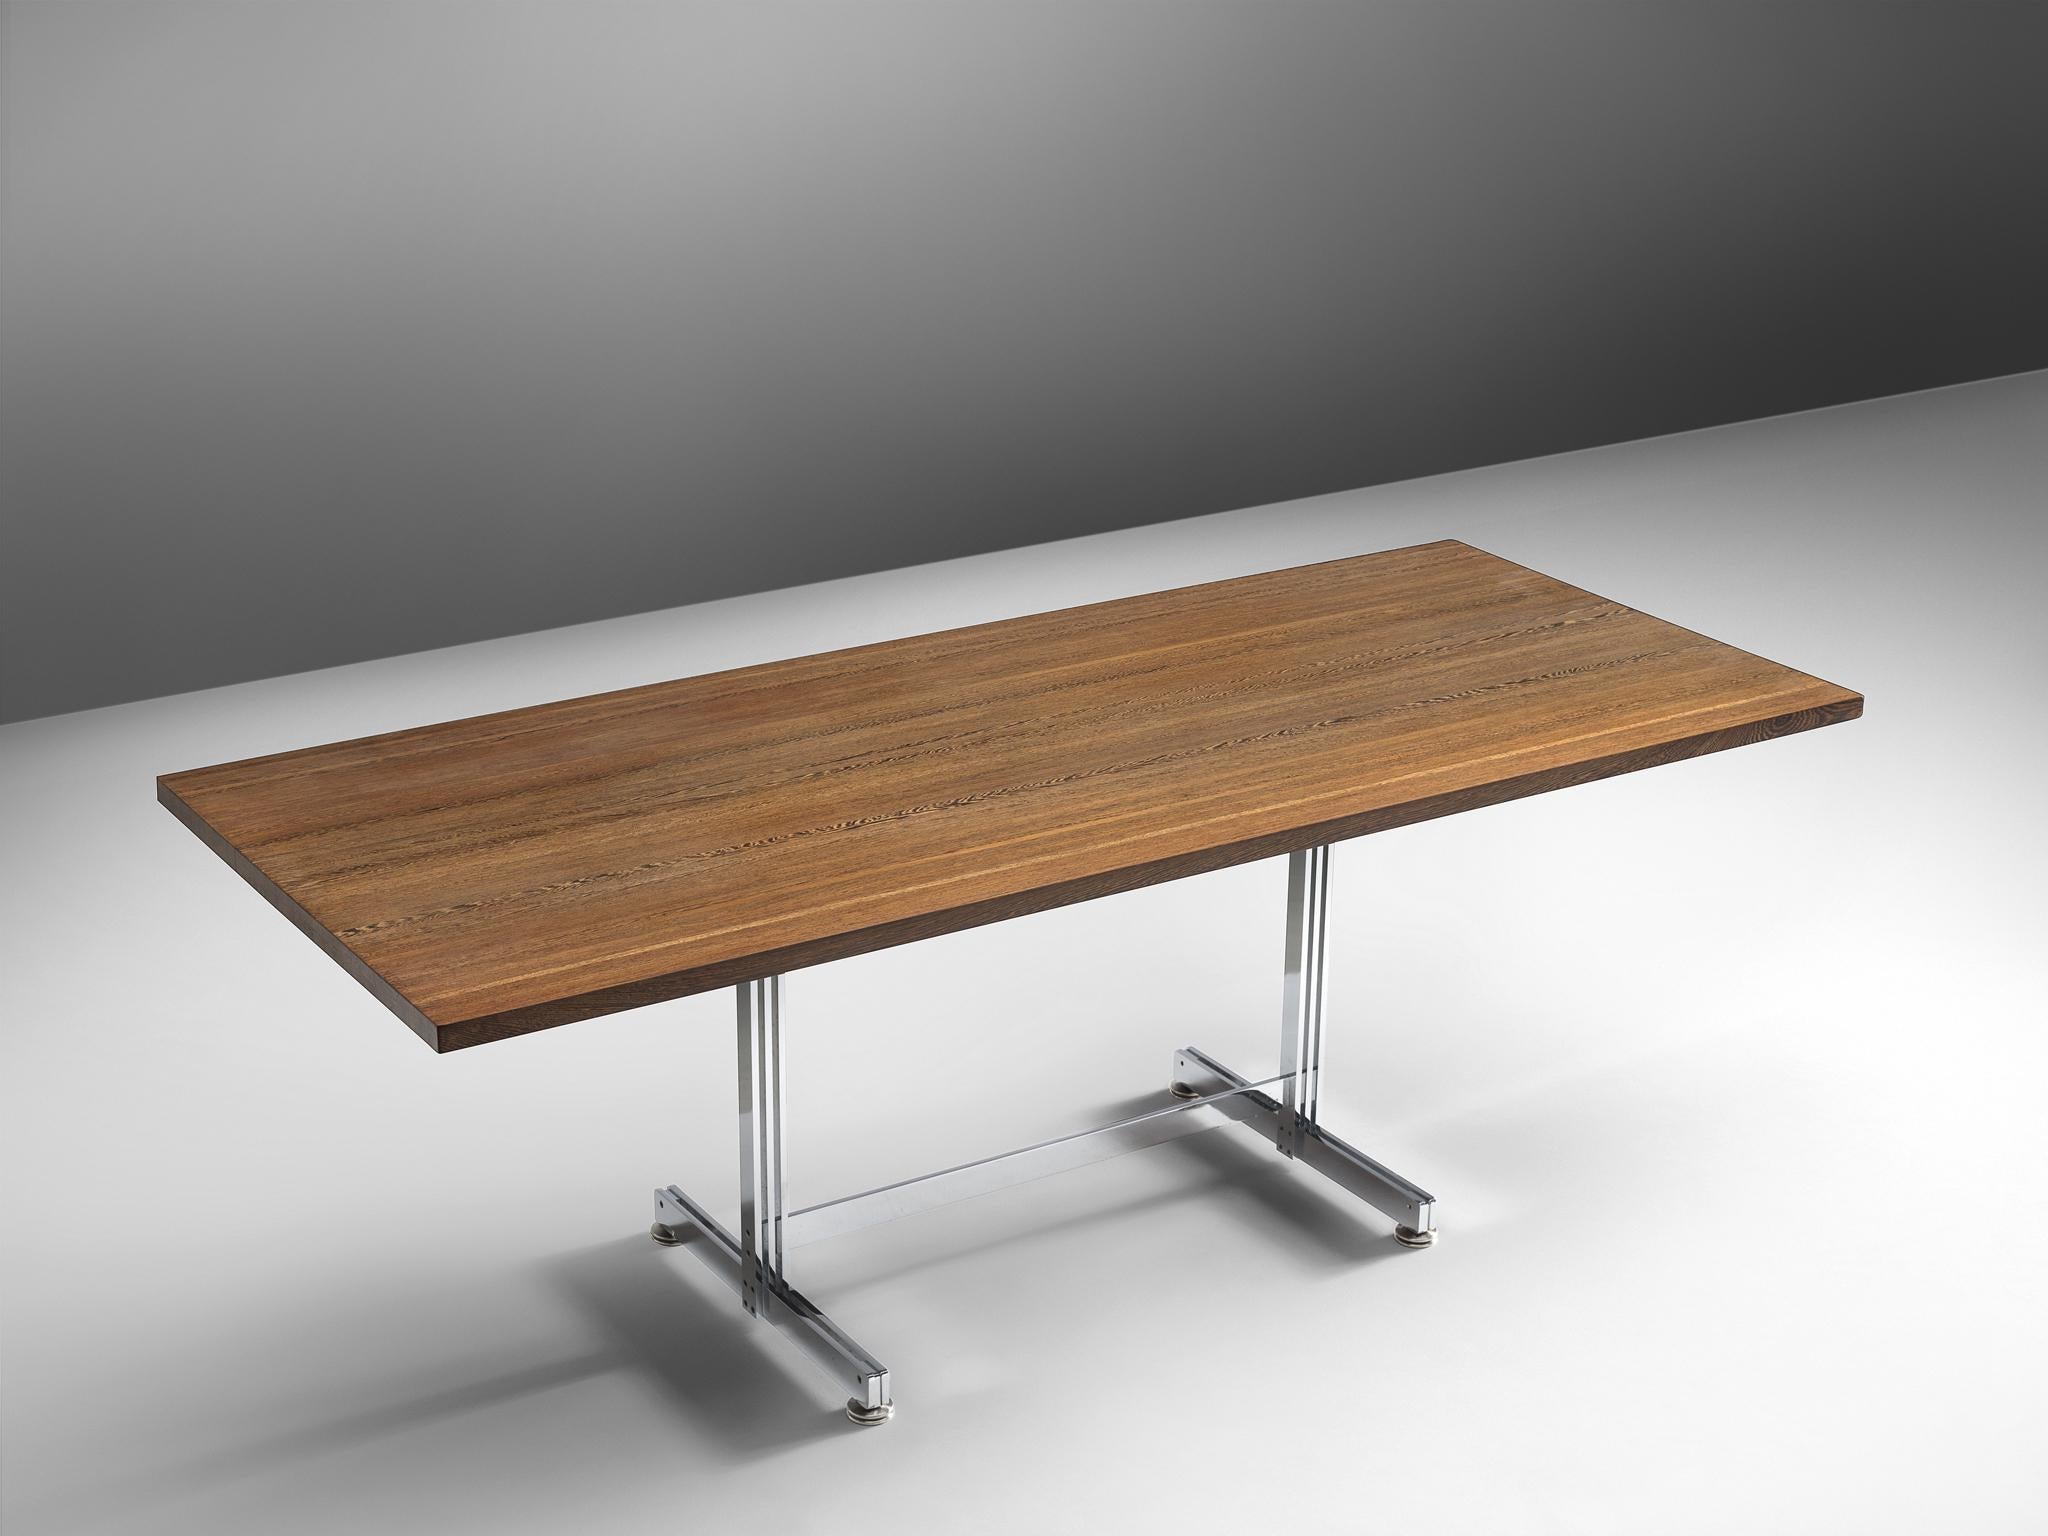 Jules Wabbes, dining table, wenge, steel, Belgium, 1960s

This executive writing table by Jules Wabbes features a solid wenge wooden top, made out of tangentially-sawn wenge slats. Due to the slats, the tabletop features a wonderful pattern in the